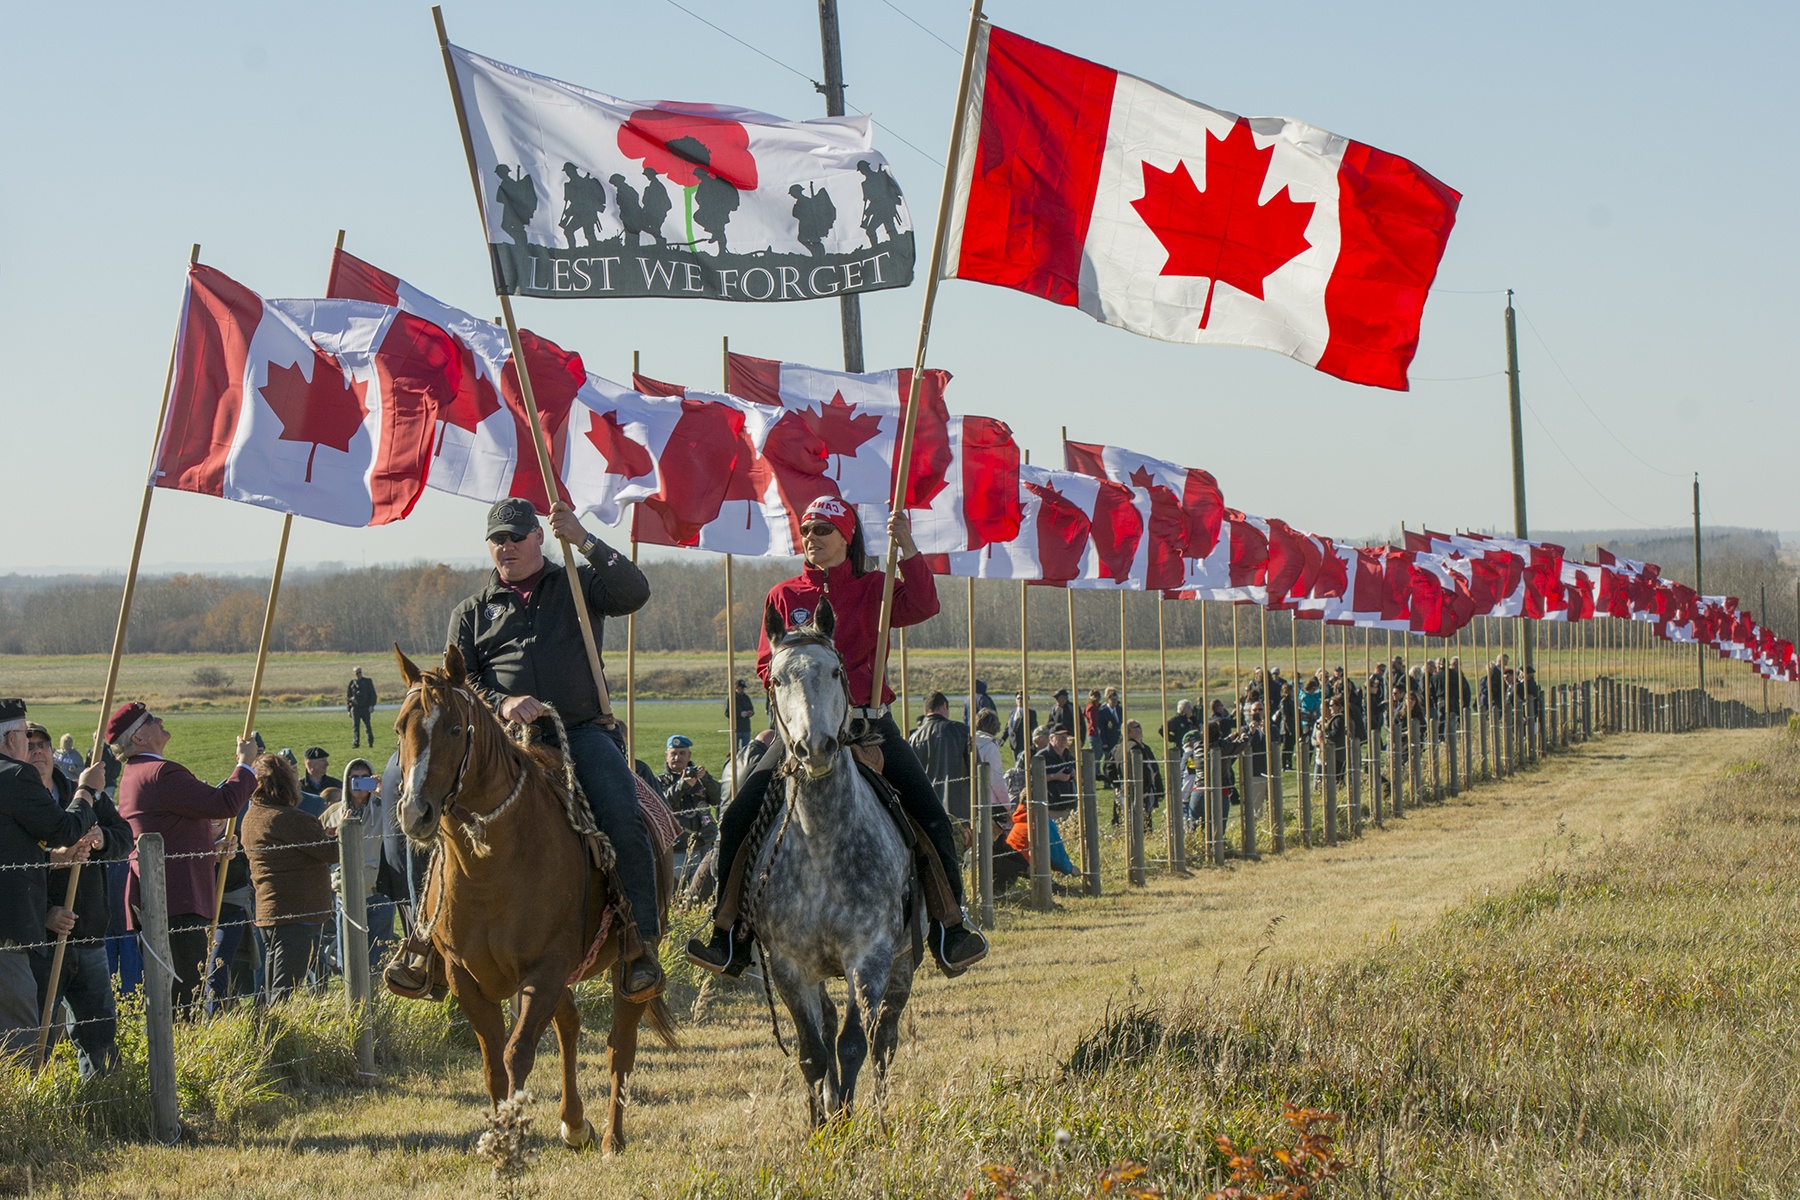 HONOUR - Last October saw Central Albertans gather outside Sylvan Lake for the second annual Veterans Voices of Canada Flags of Remembrance ceremony. Ryan Doell rides his horse Champagne next to Rebecca Santana and her horse Mable during the raising of the flags.